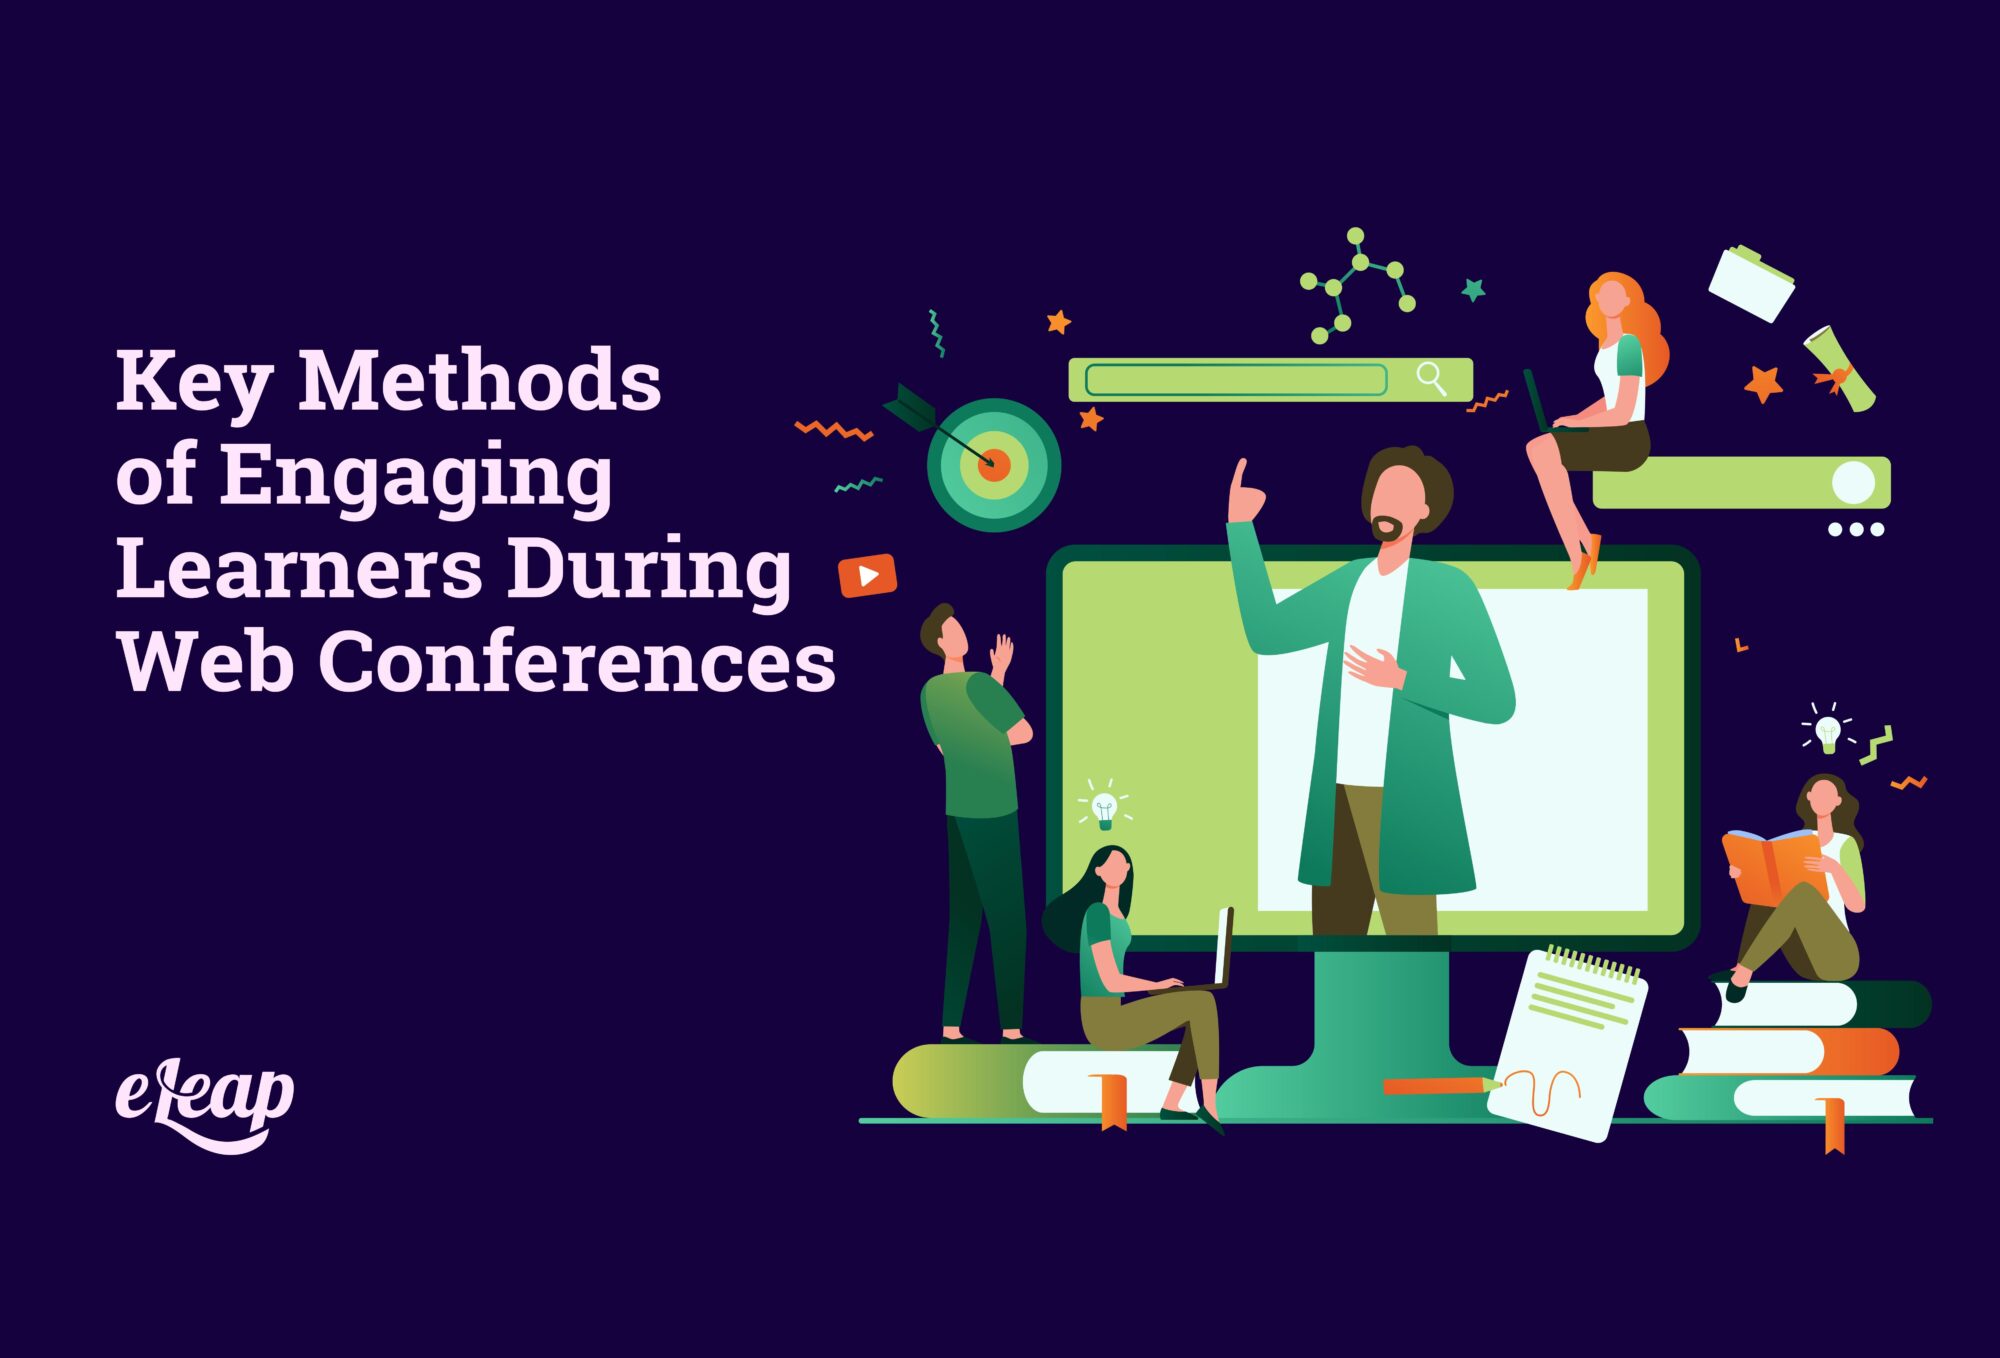 Key Methods of Engaging Learners During Web Conferences